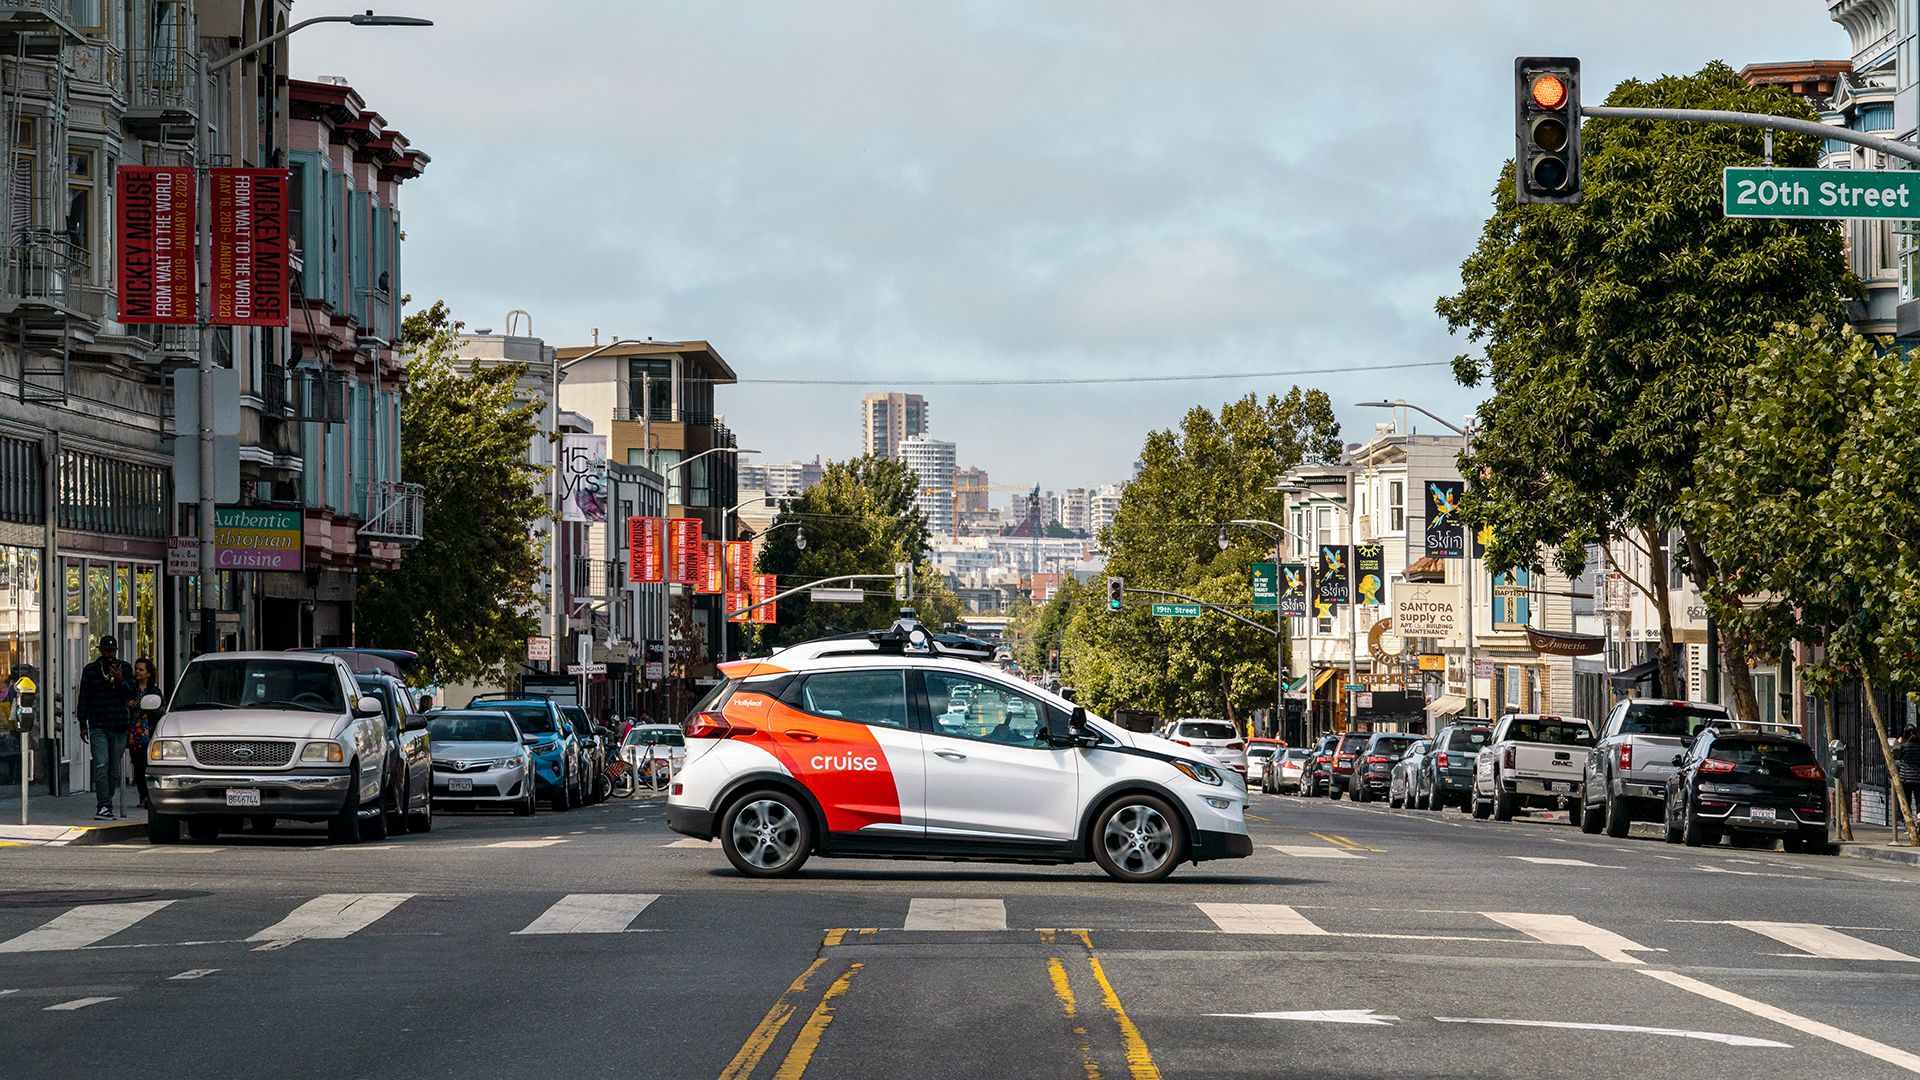 Image of Cruise self-driving test vehicle in San Francisco